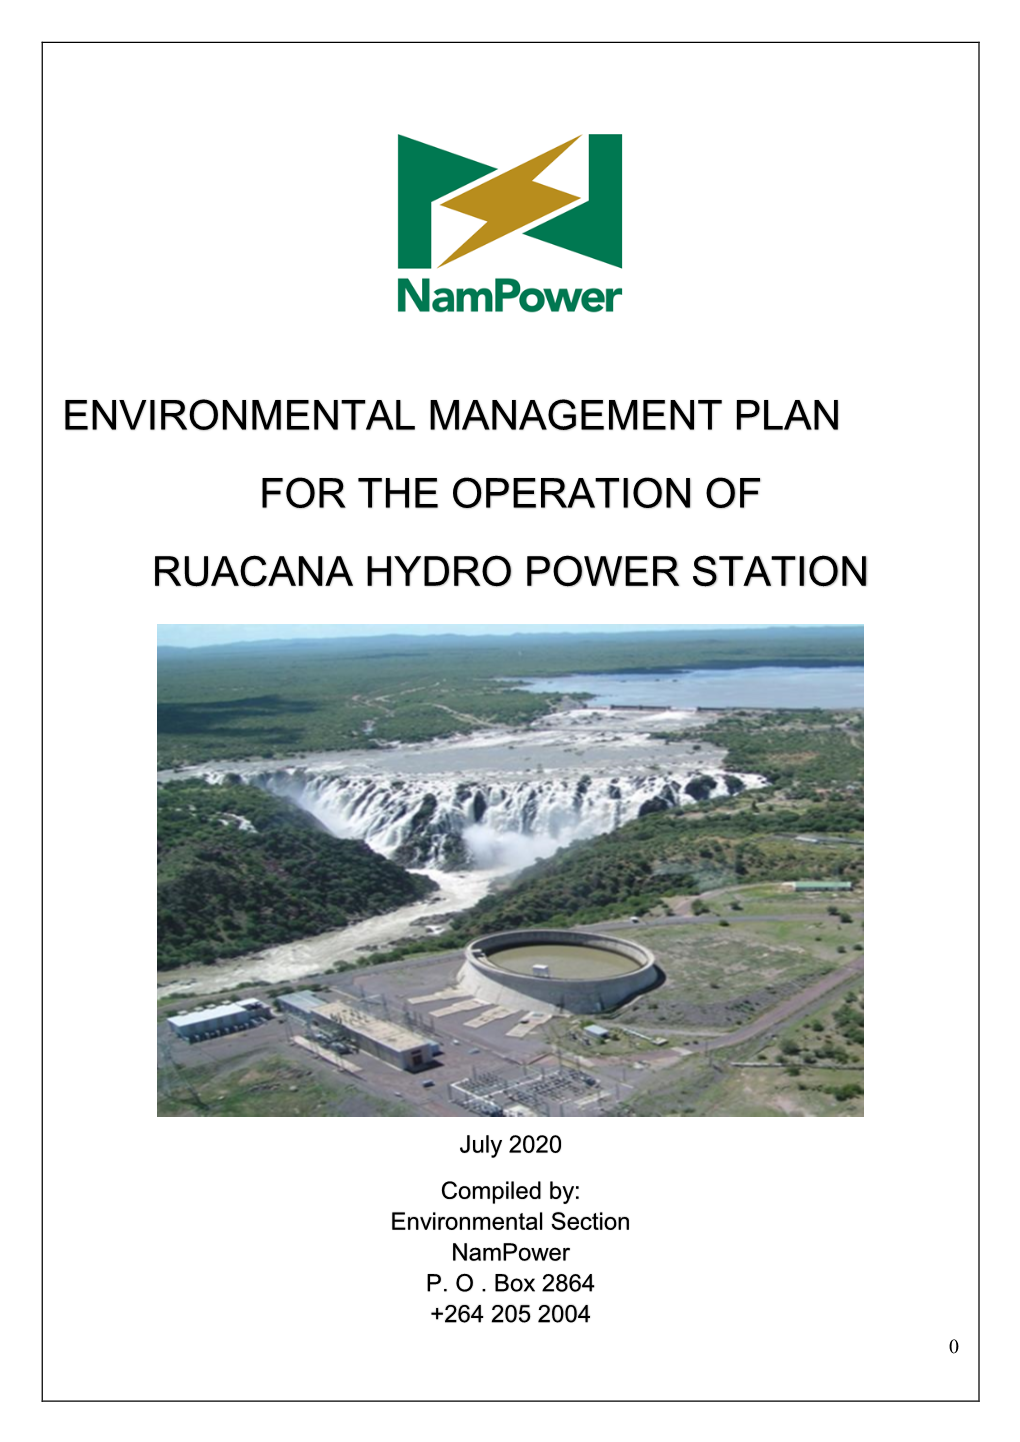 Environmental Management Plan for the Operation of Ruacana Hydro Power Station